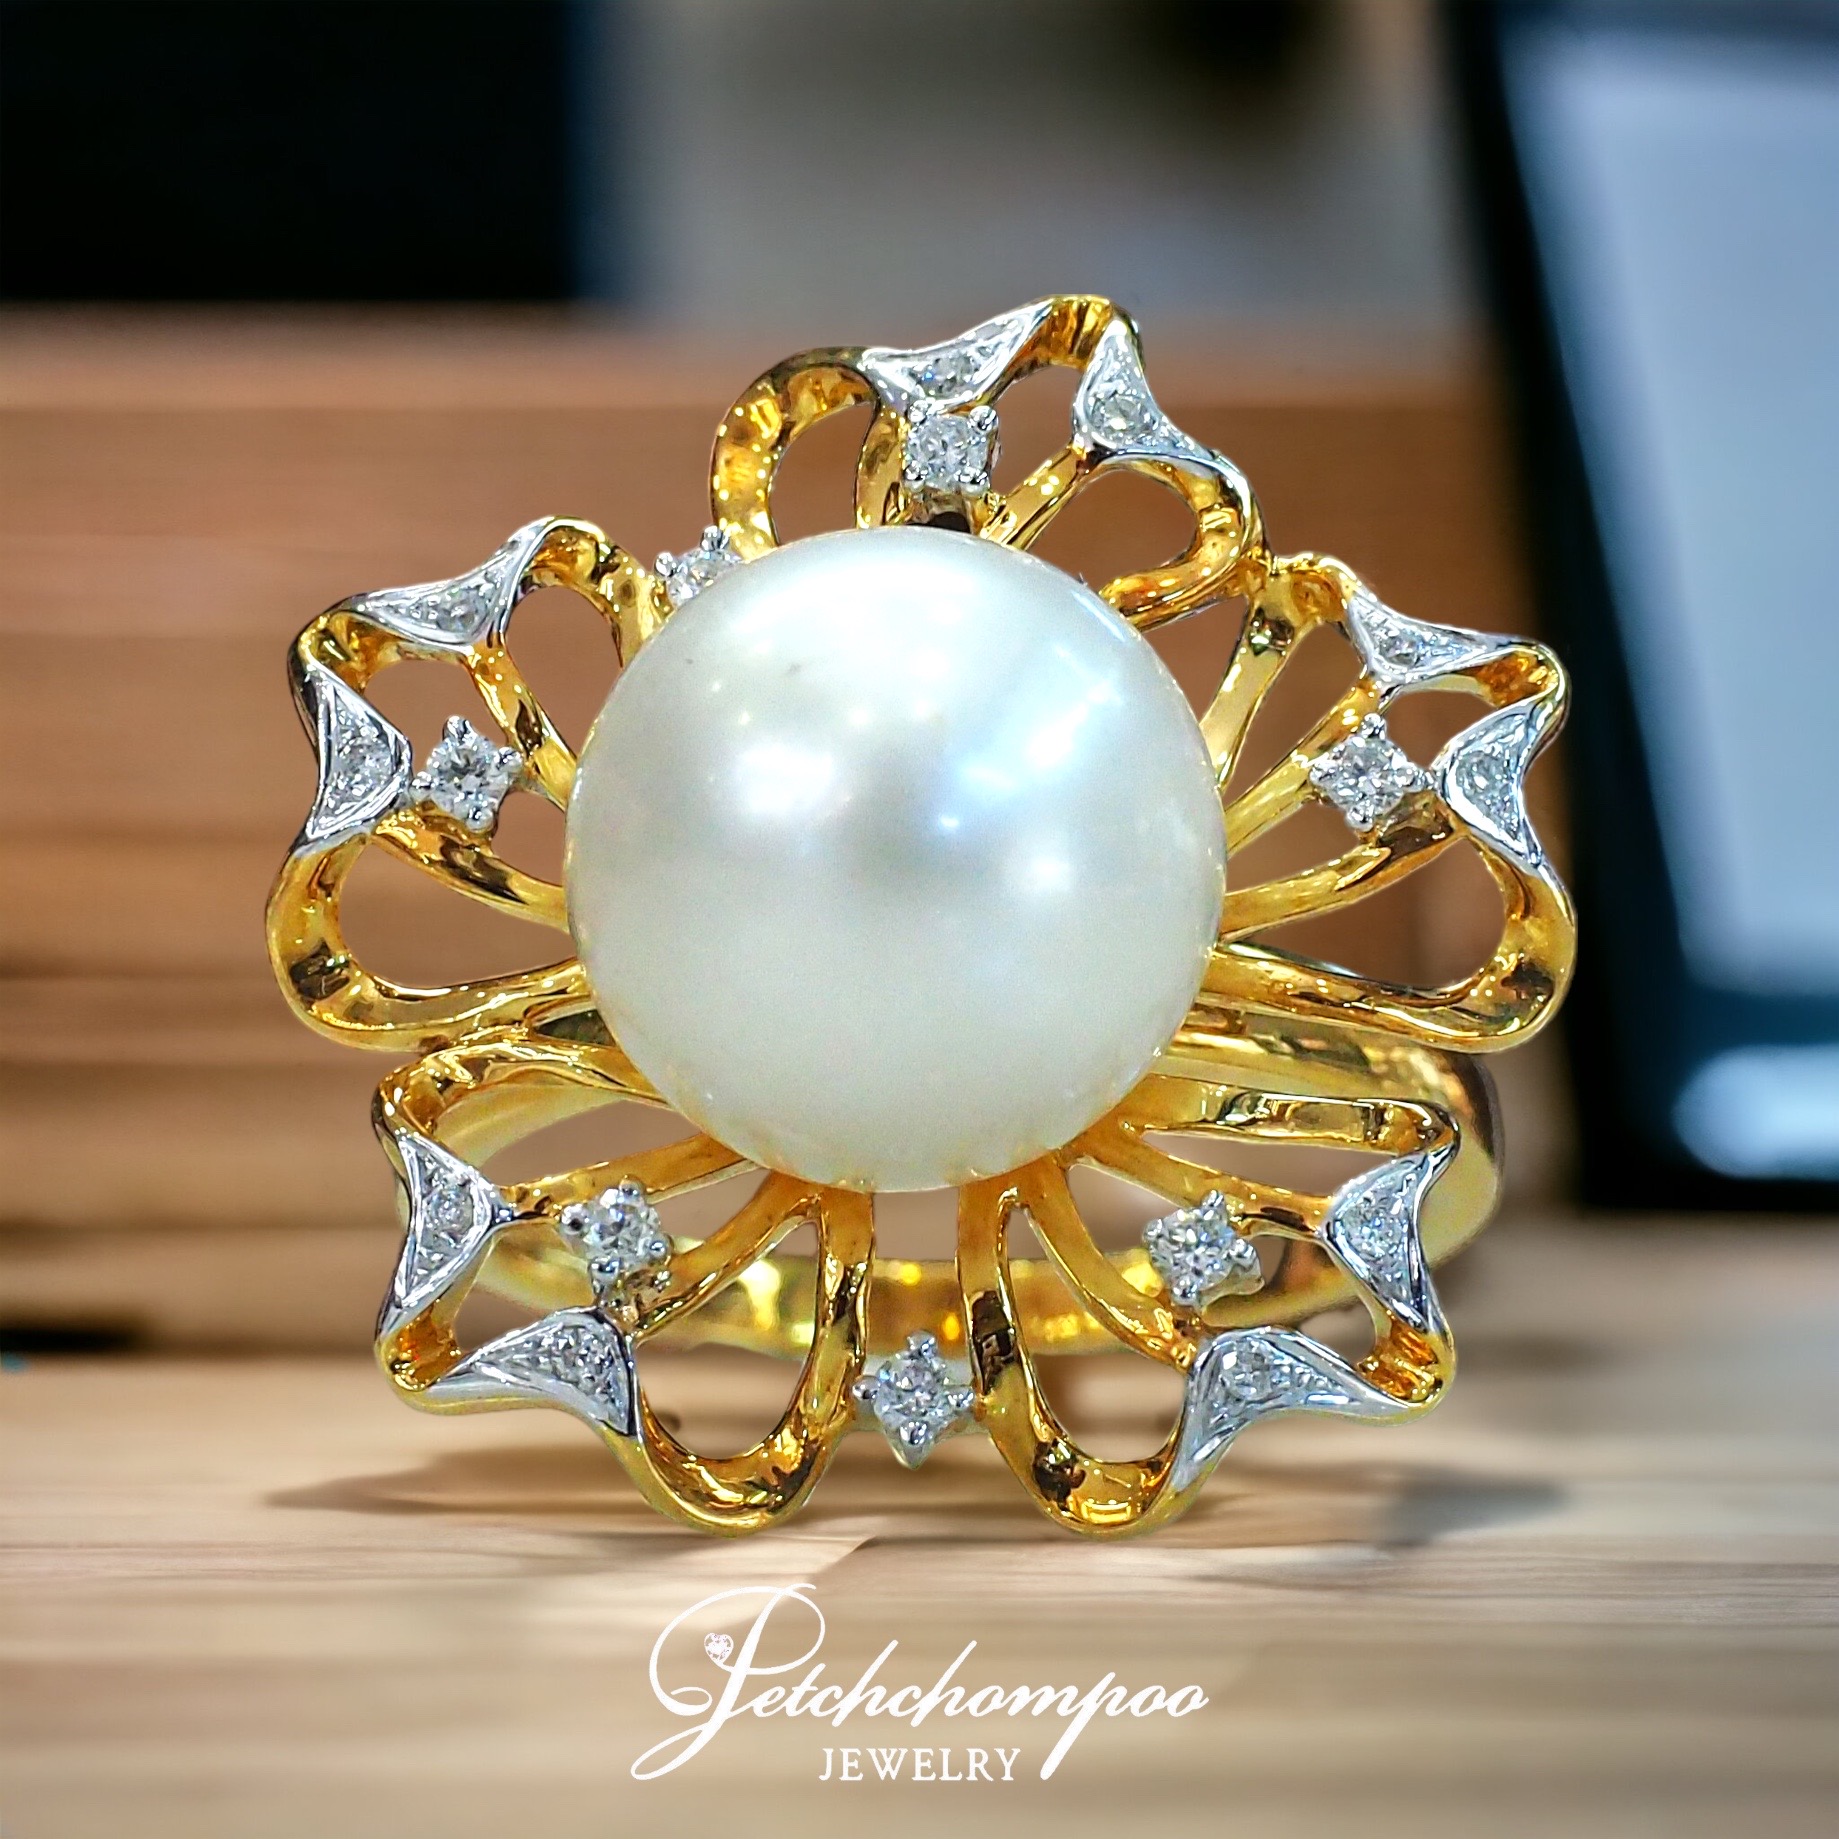 [27779] South Sea pearl ring 12 mm  39,000 